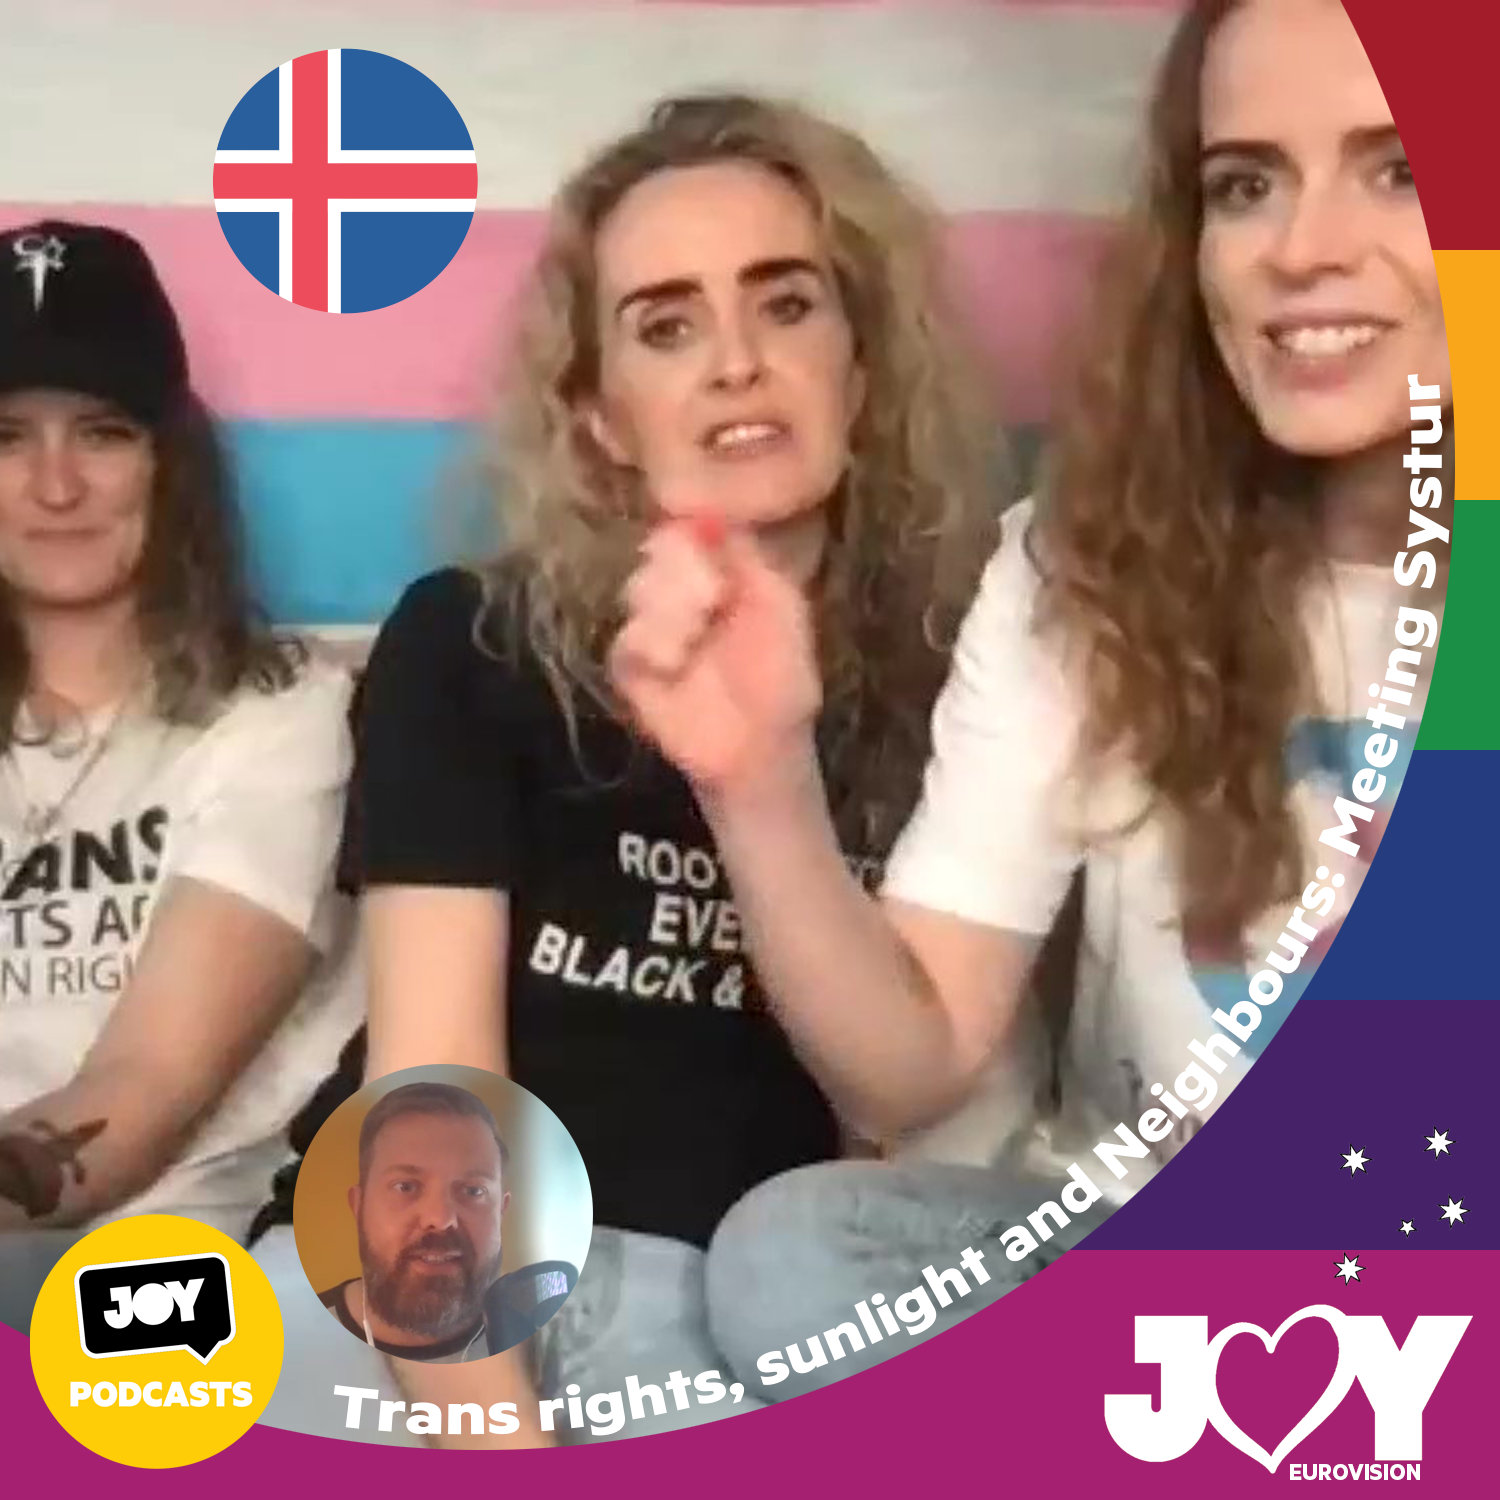 🇮🇸 Trans rights, sunlight and Neighbours: Meeting Systur